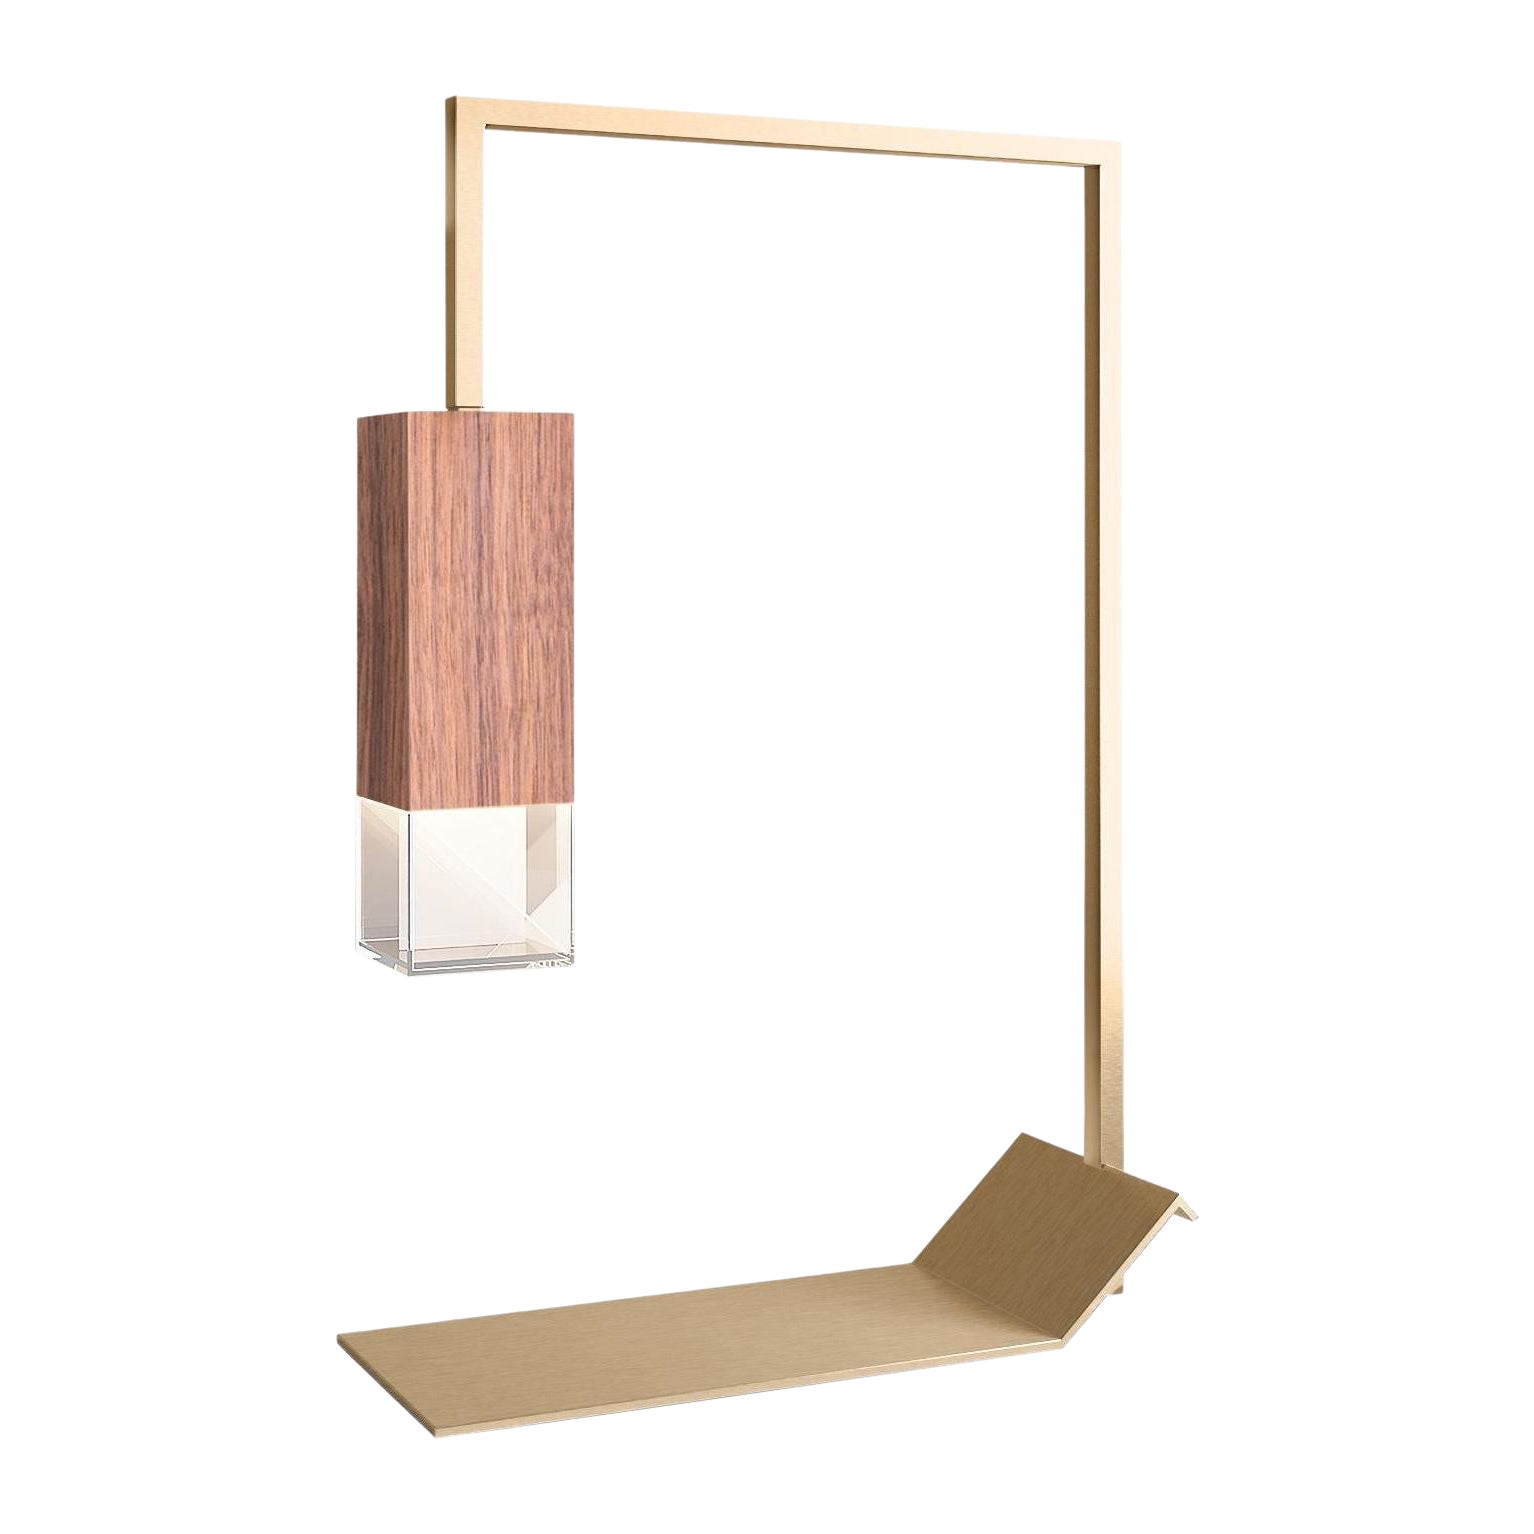 Walnut Table Lamp Two Collection by Formaminima